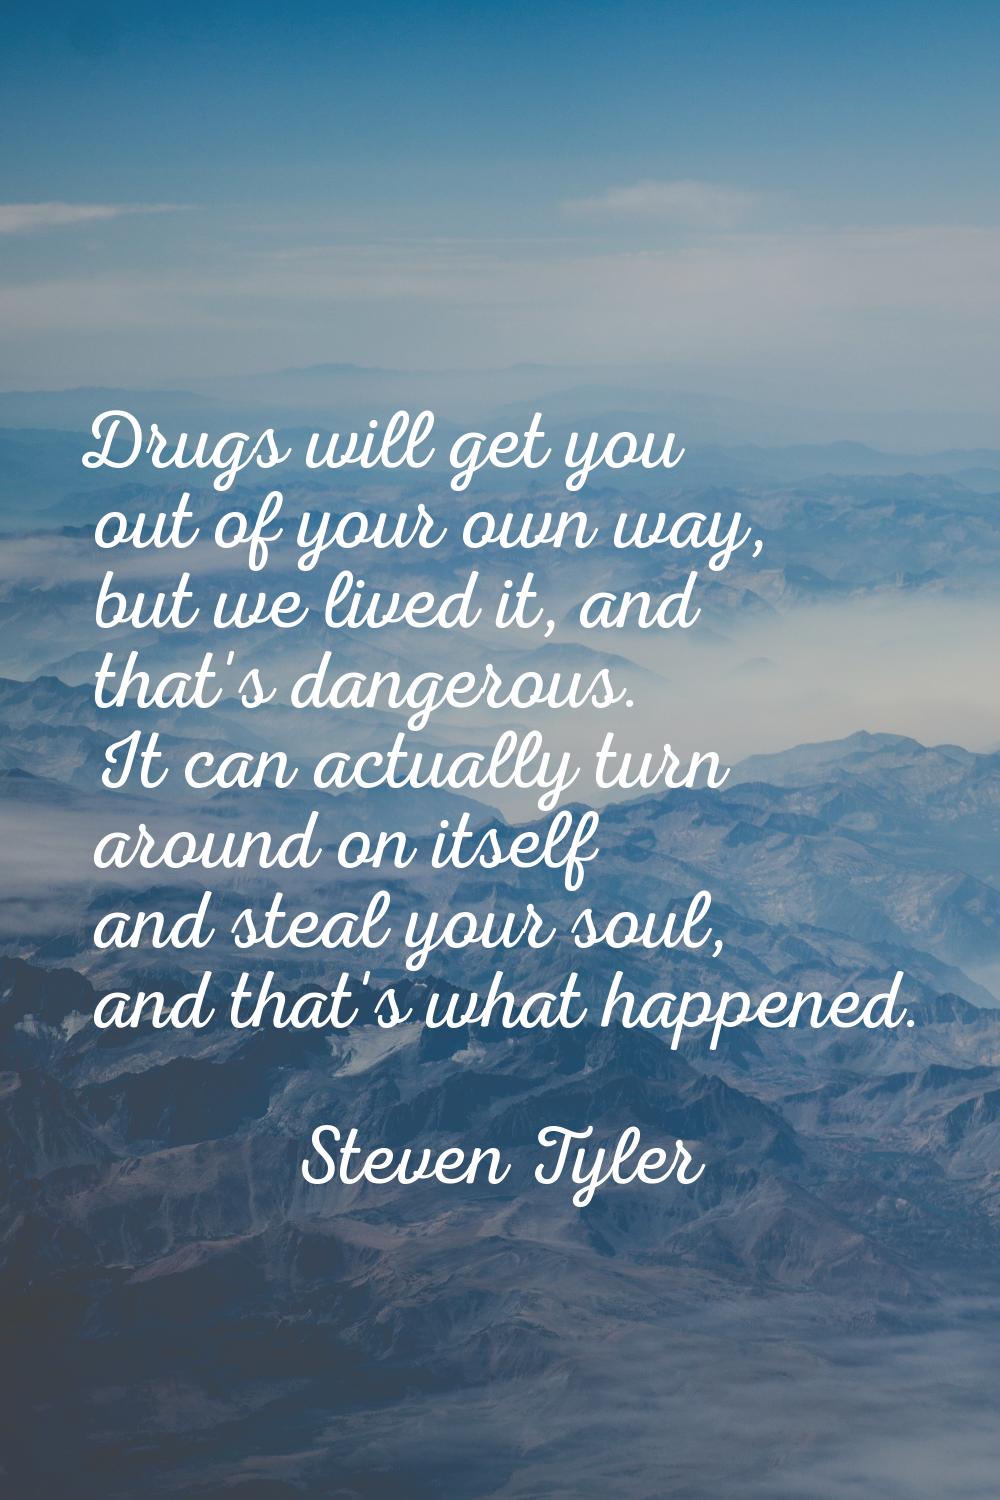 Drugs will get you out of your own way, but we lived it, and that's dangerous. It can actually turn